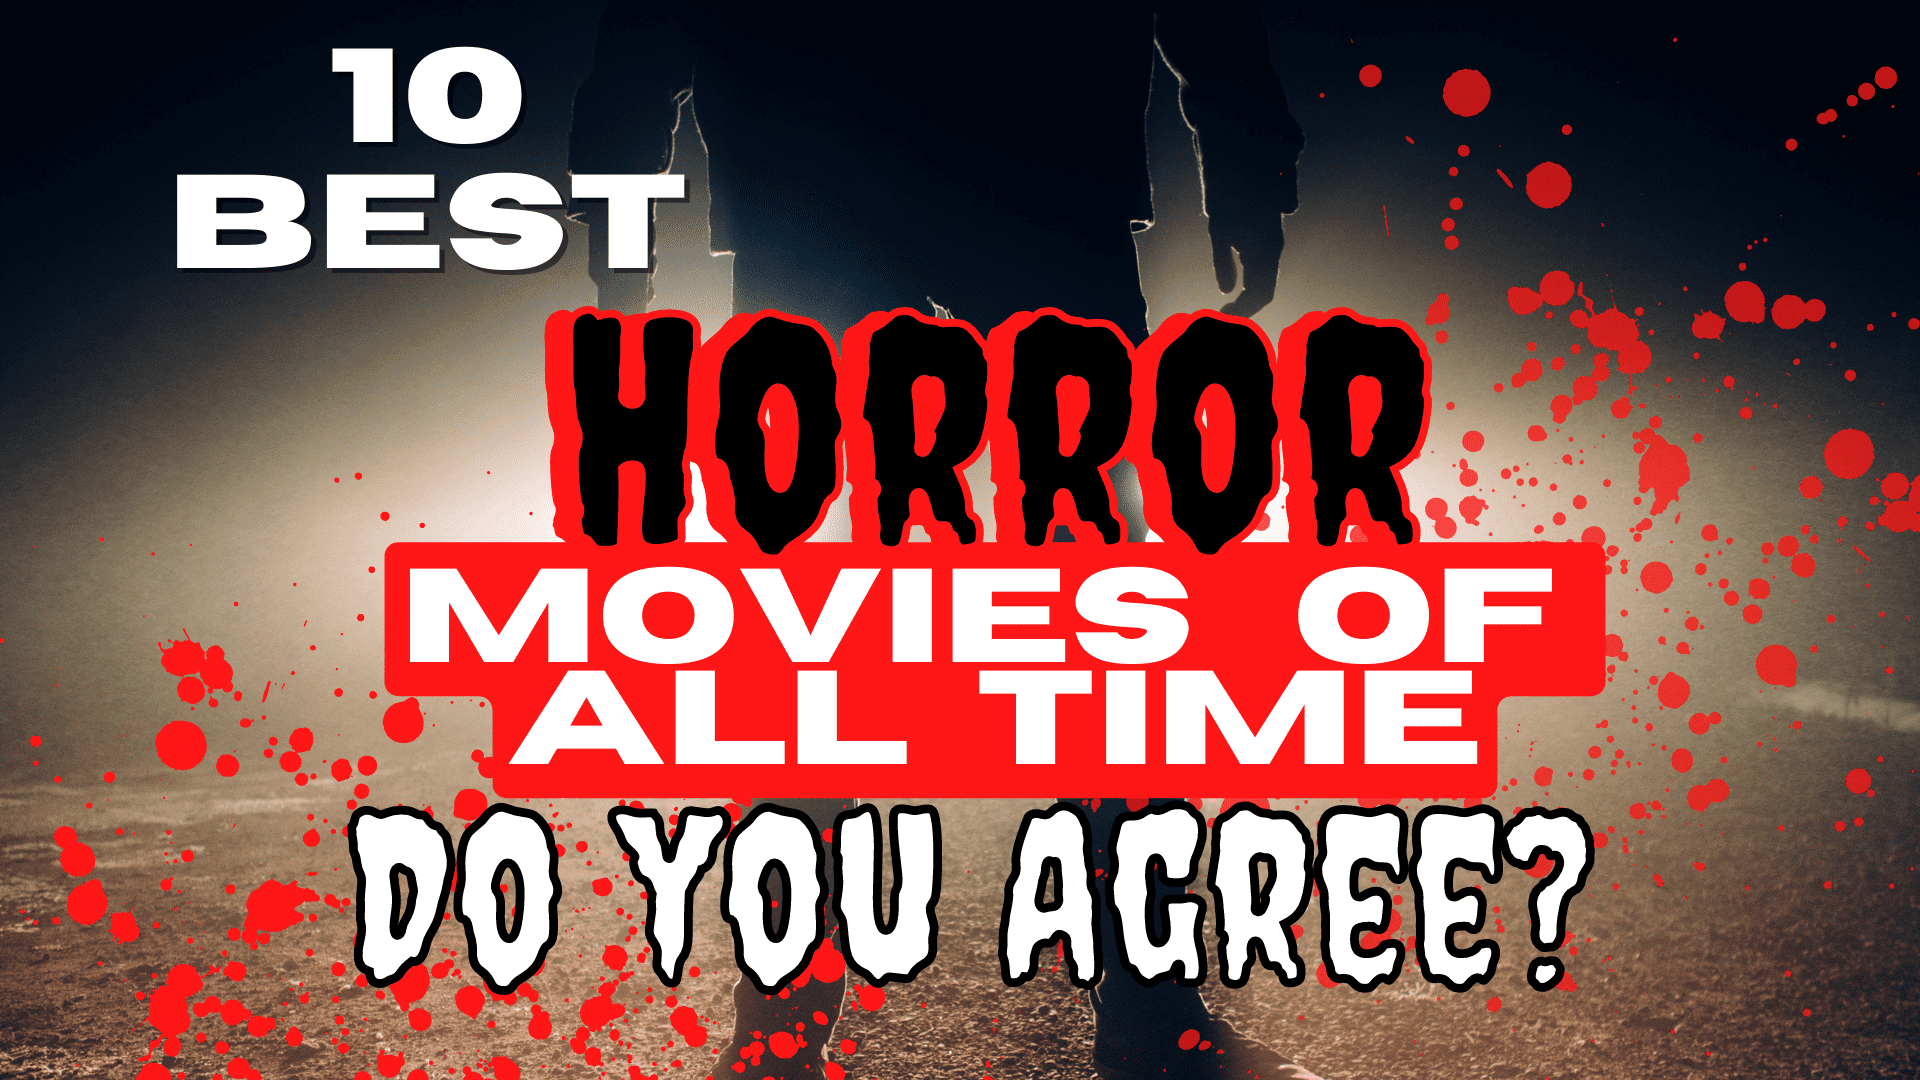 Ten best horror movies of all time. Do you agree?